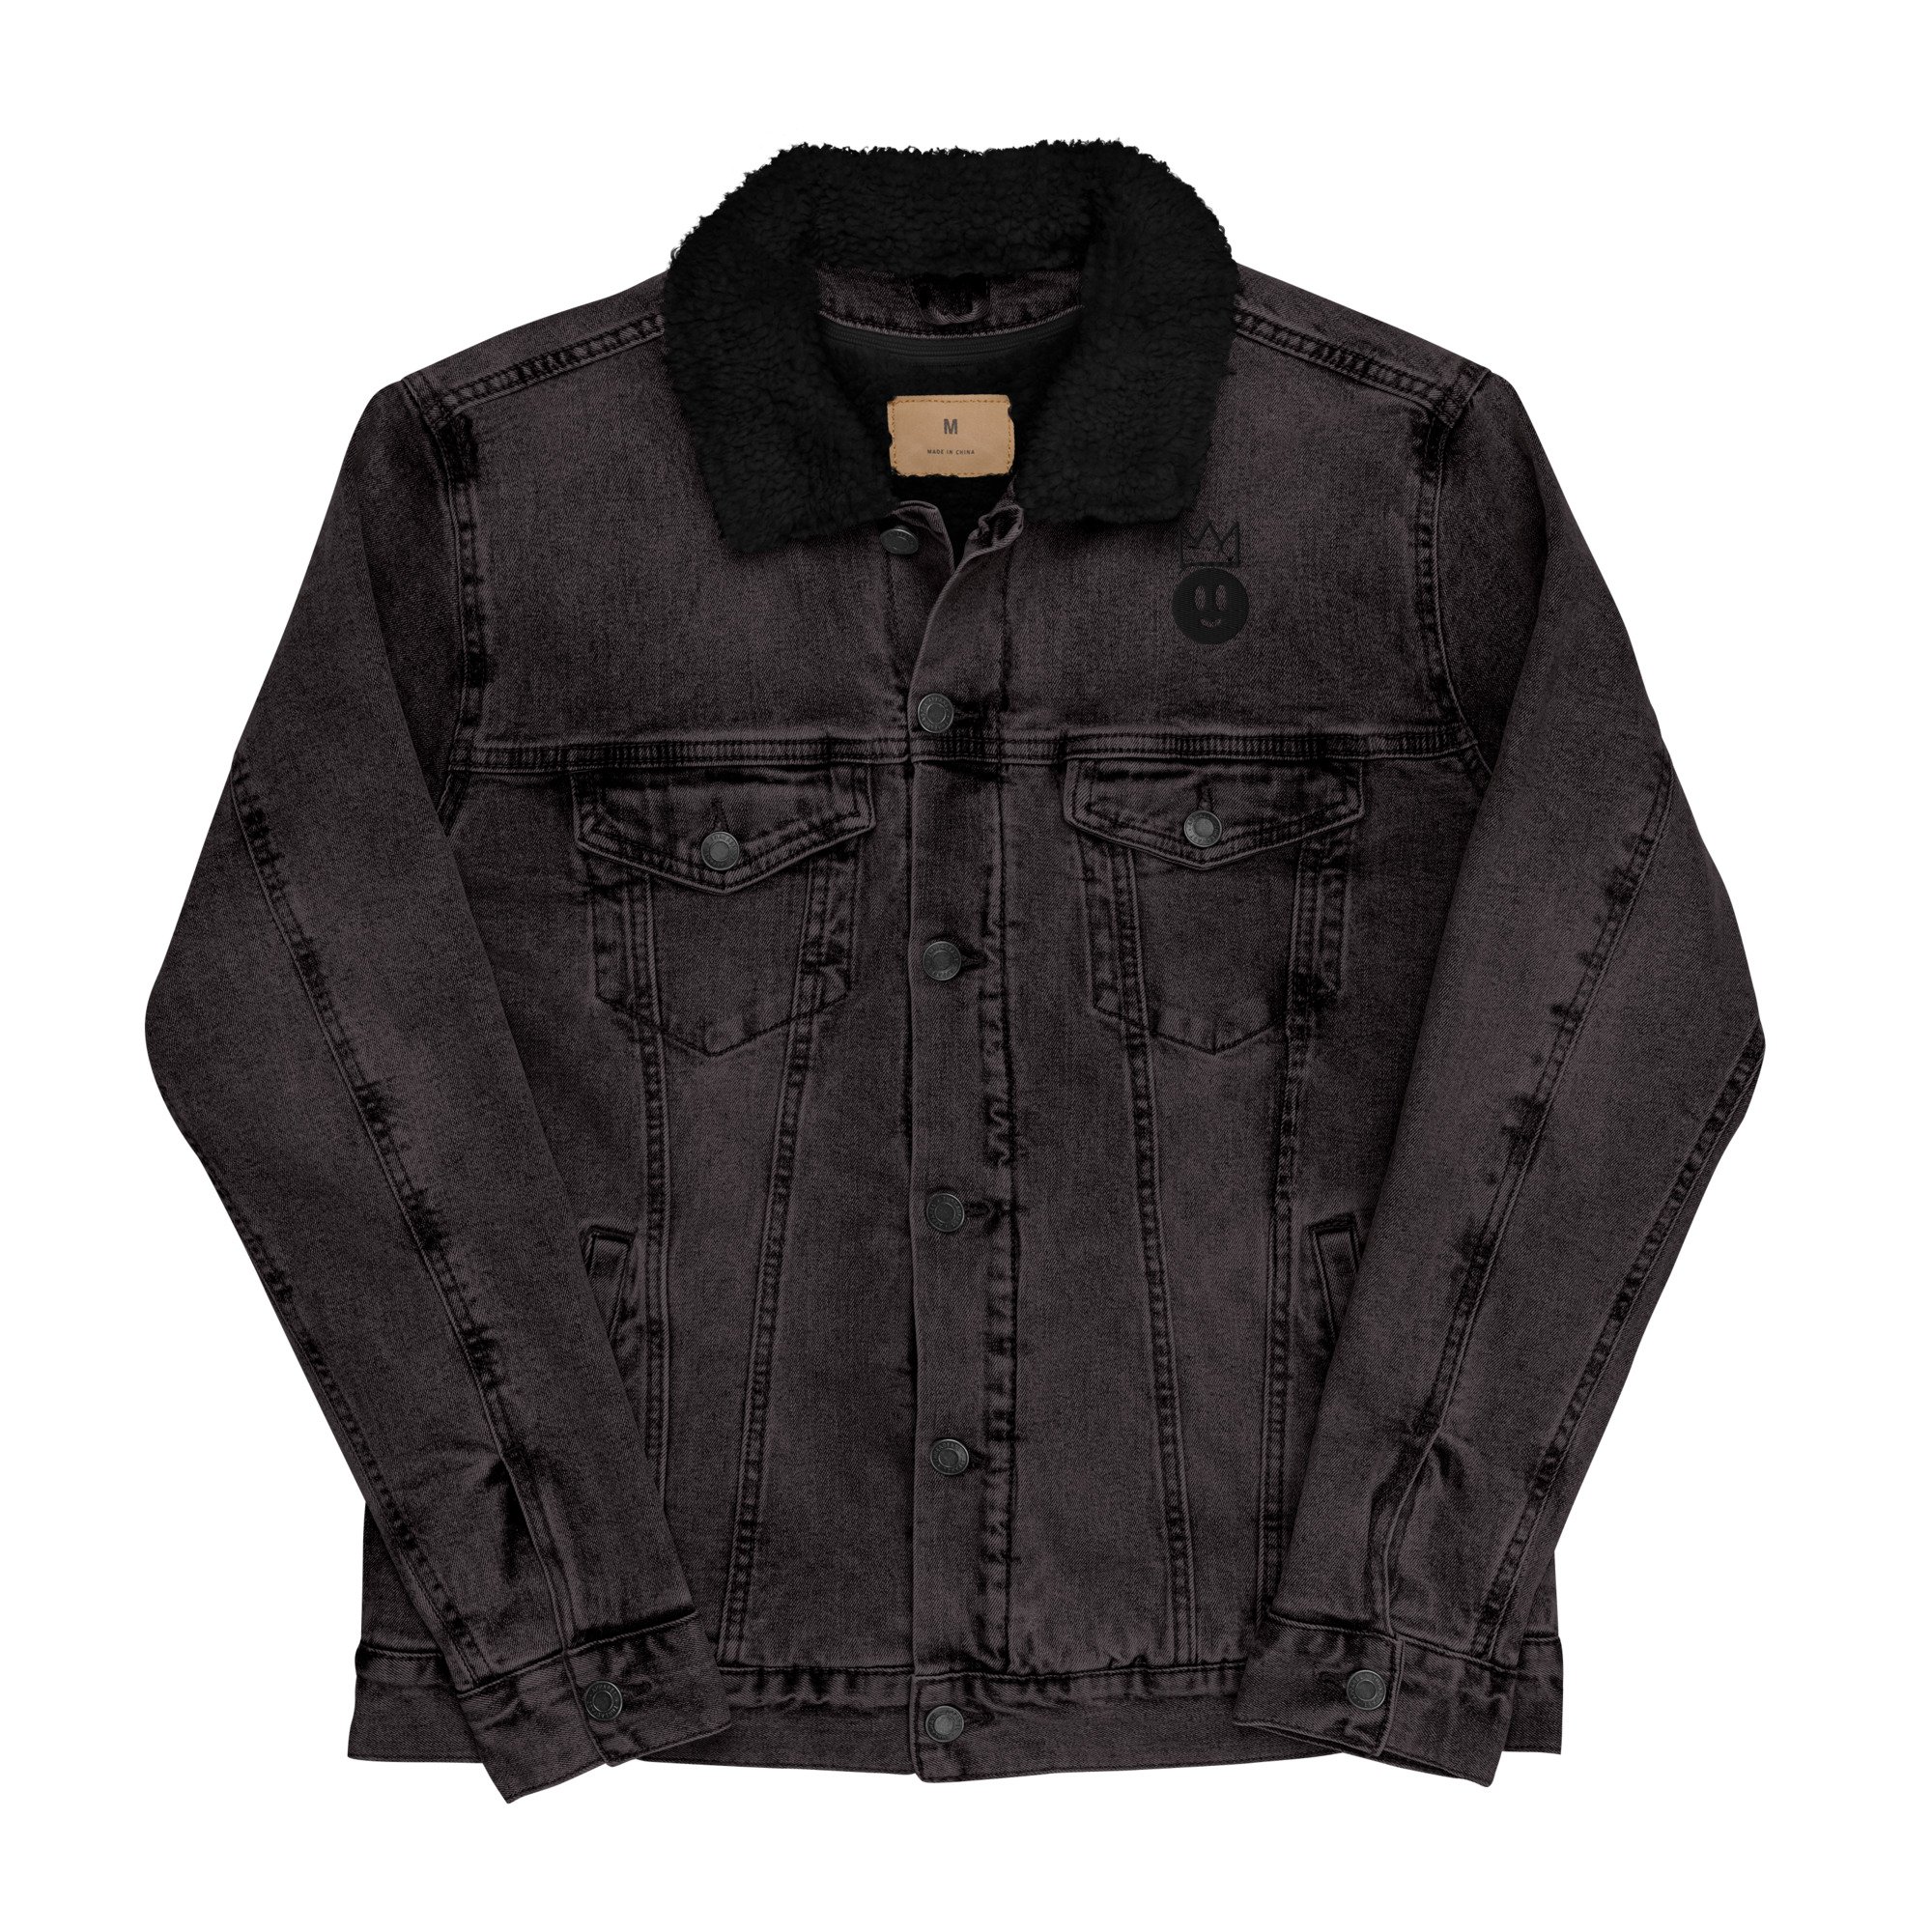 Lee Jeans Sherpa Jacket  7180  Buy Denim Jackets from Lee Jeans online  at Booztcom Fast delivery and easy returns